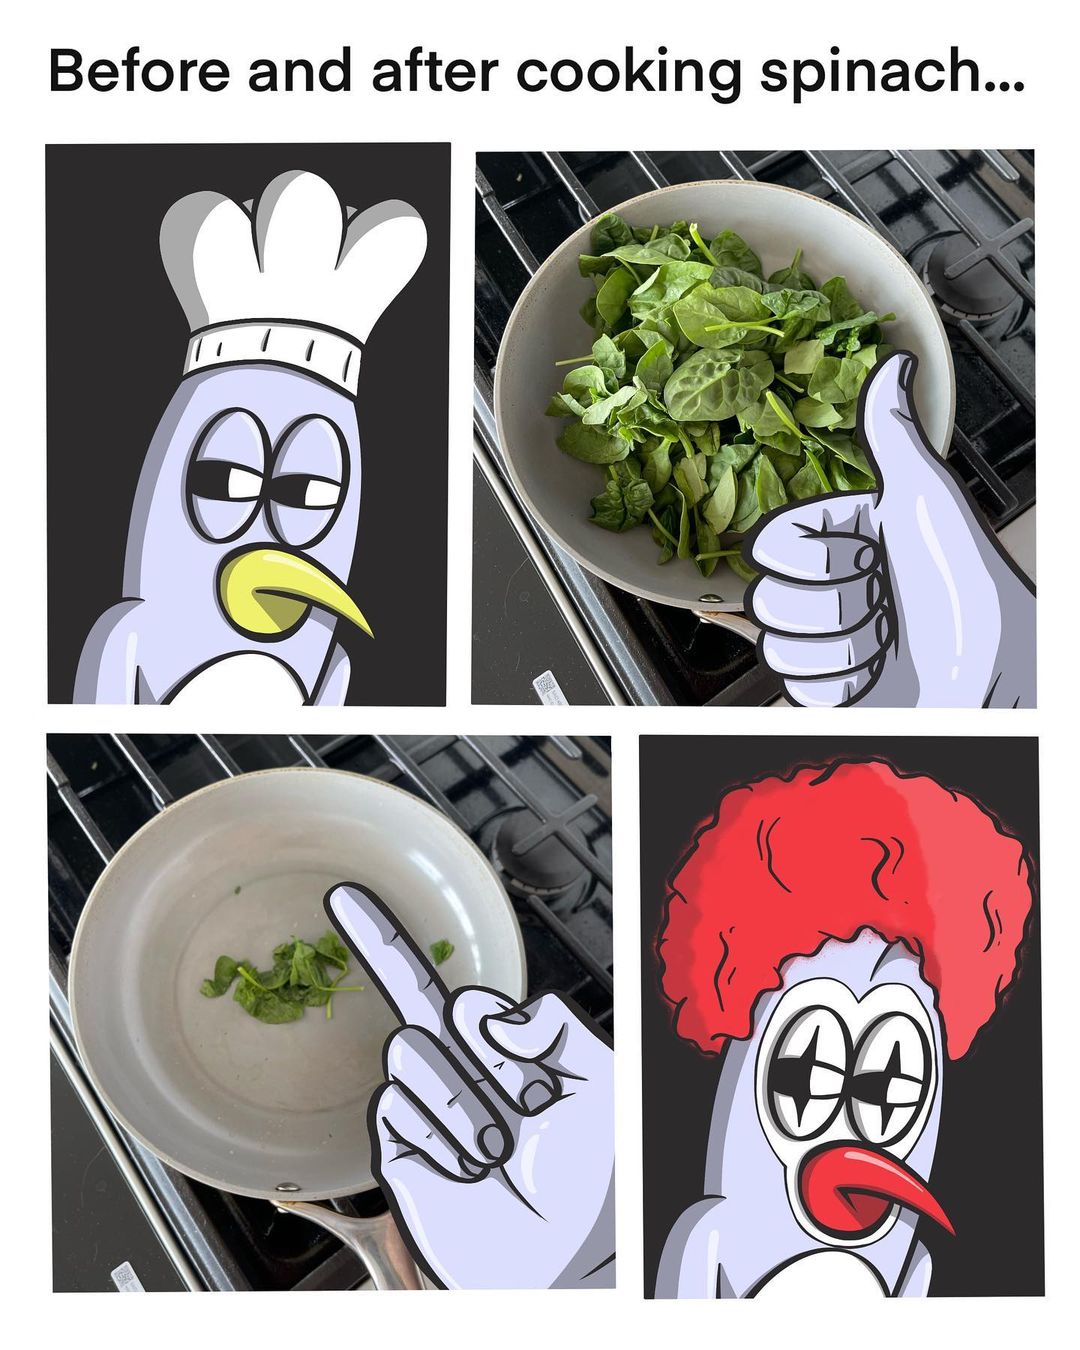 Before and after cooking spinach...